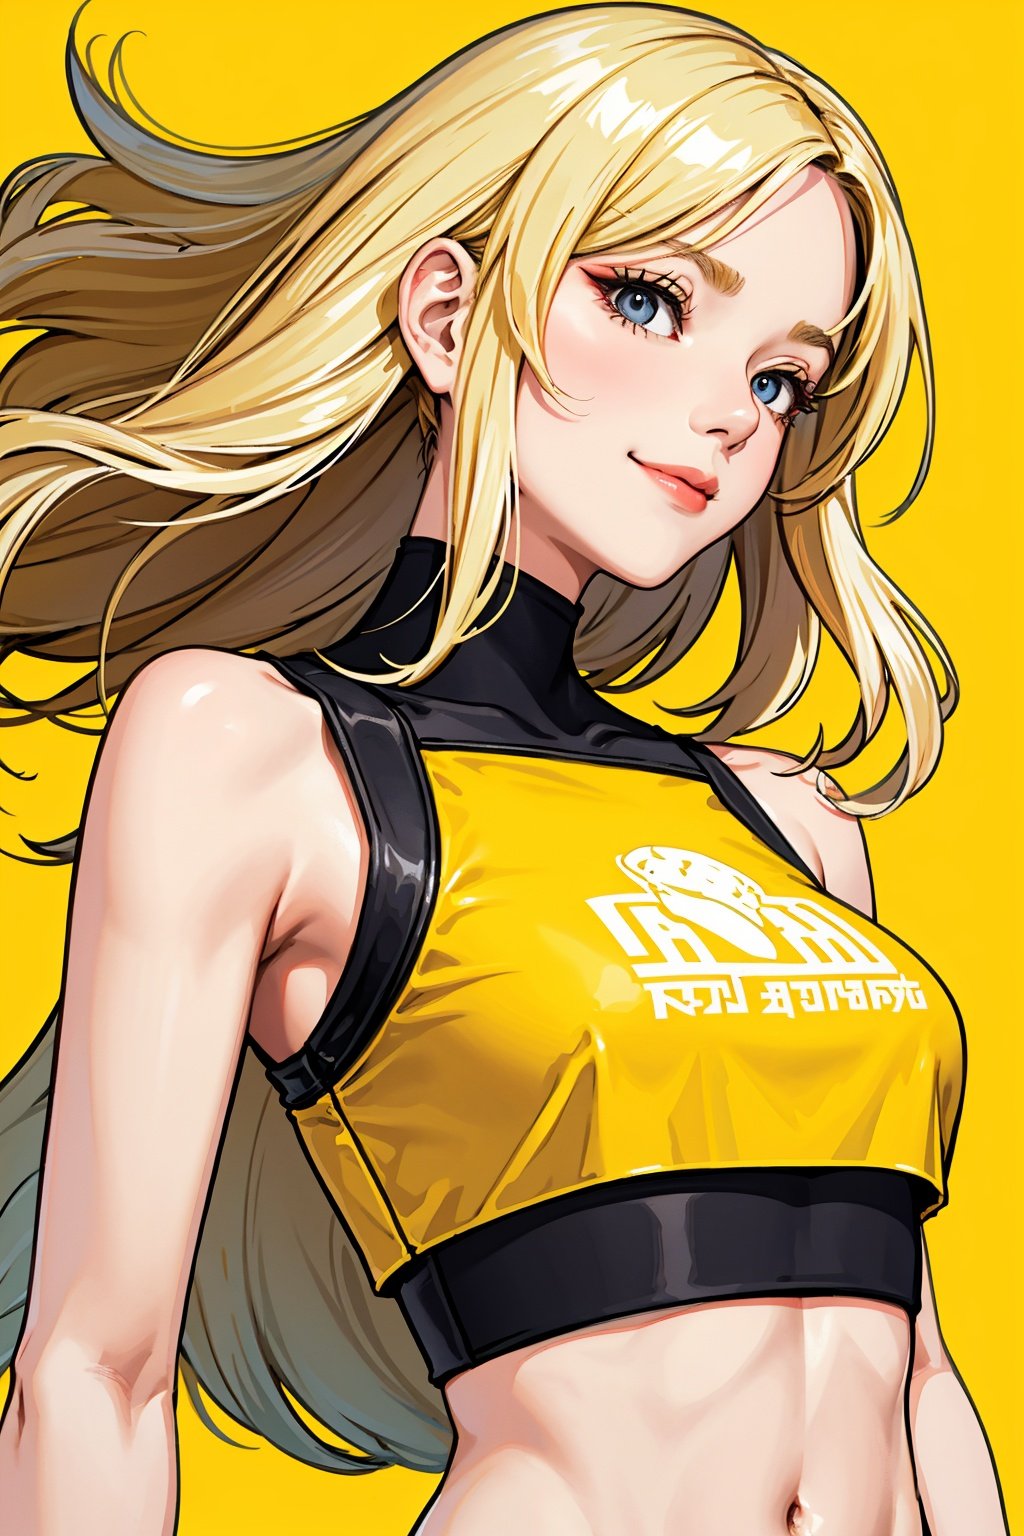 russian woman, medium hair, blonde, close-up, smile, crop top, (yellow background)